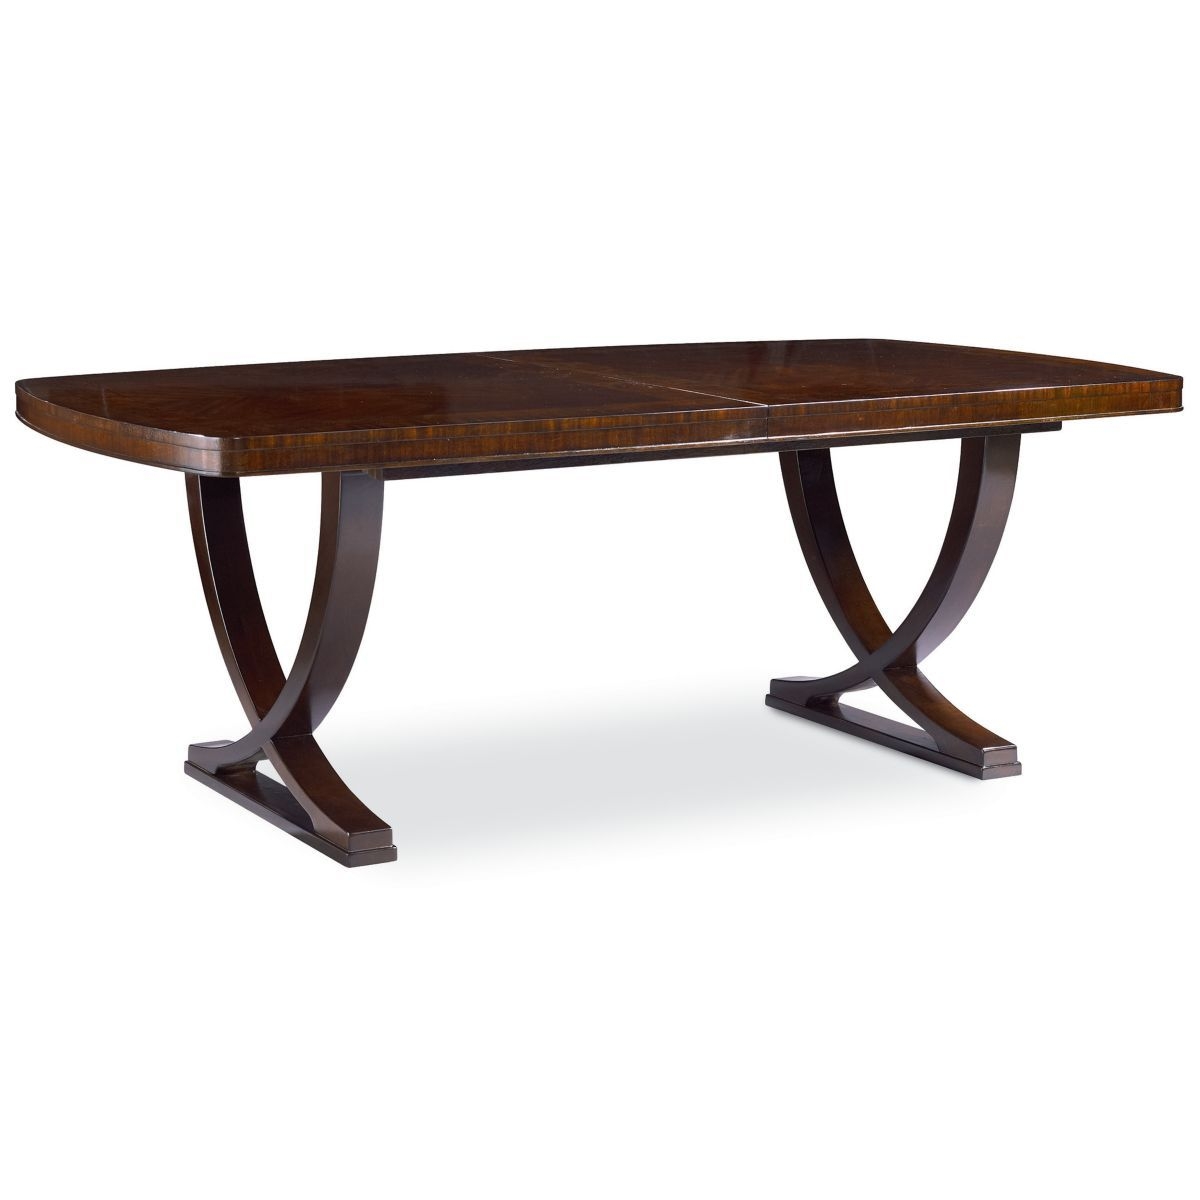 Double pedestal dining tables